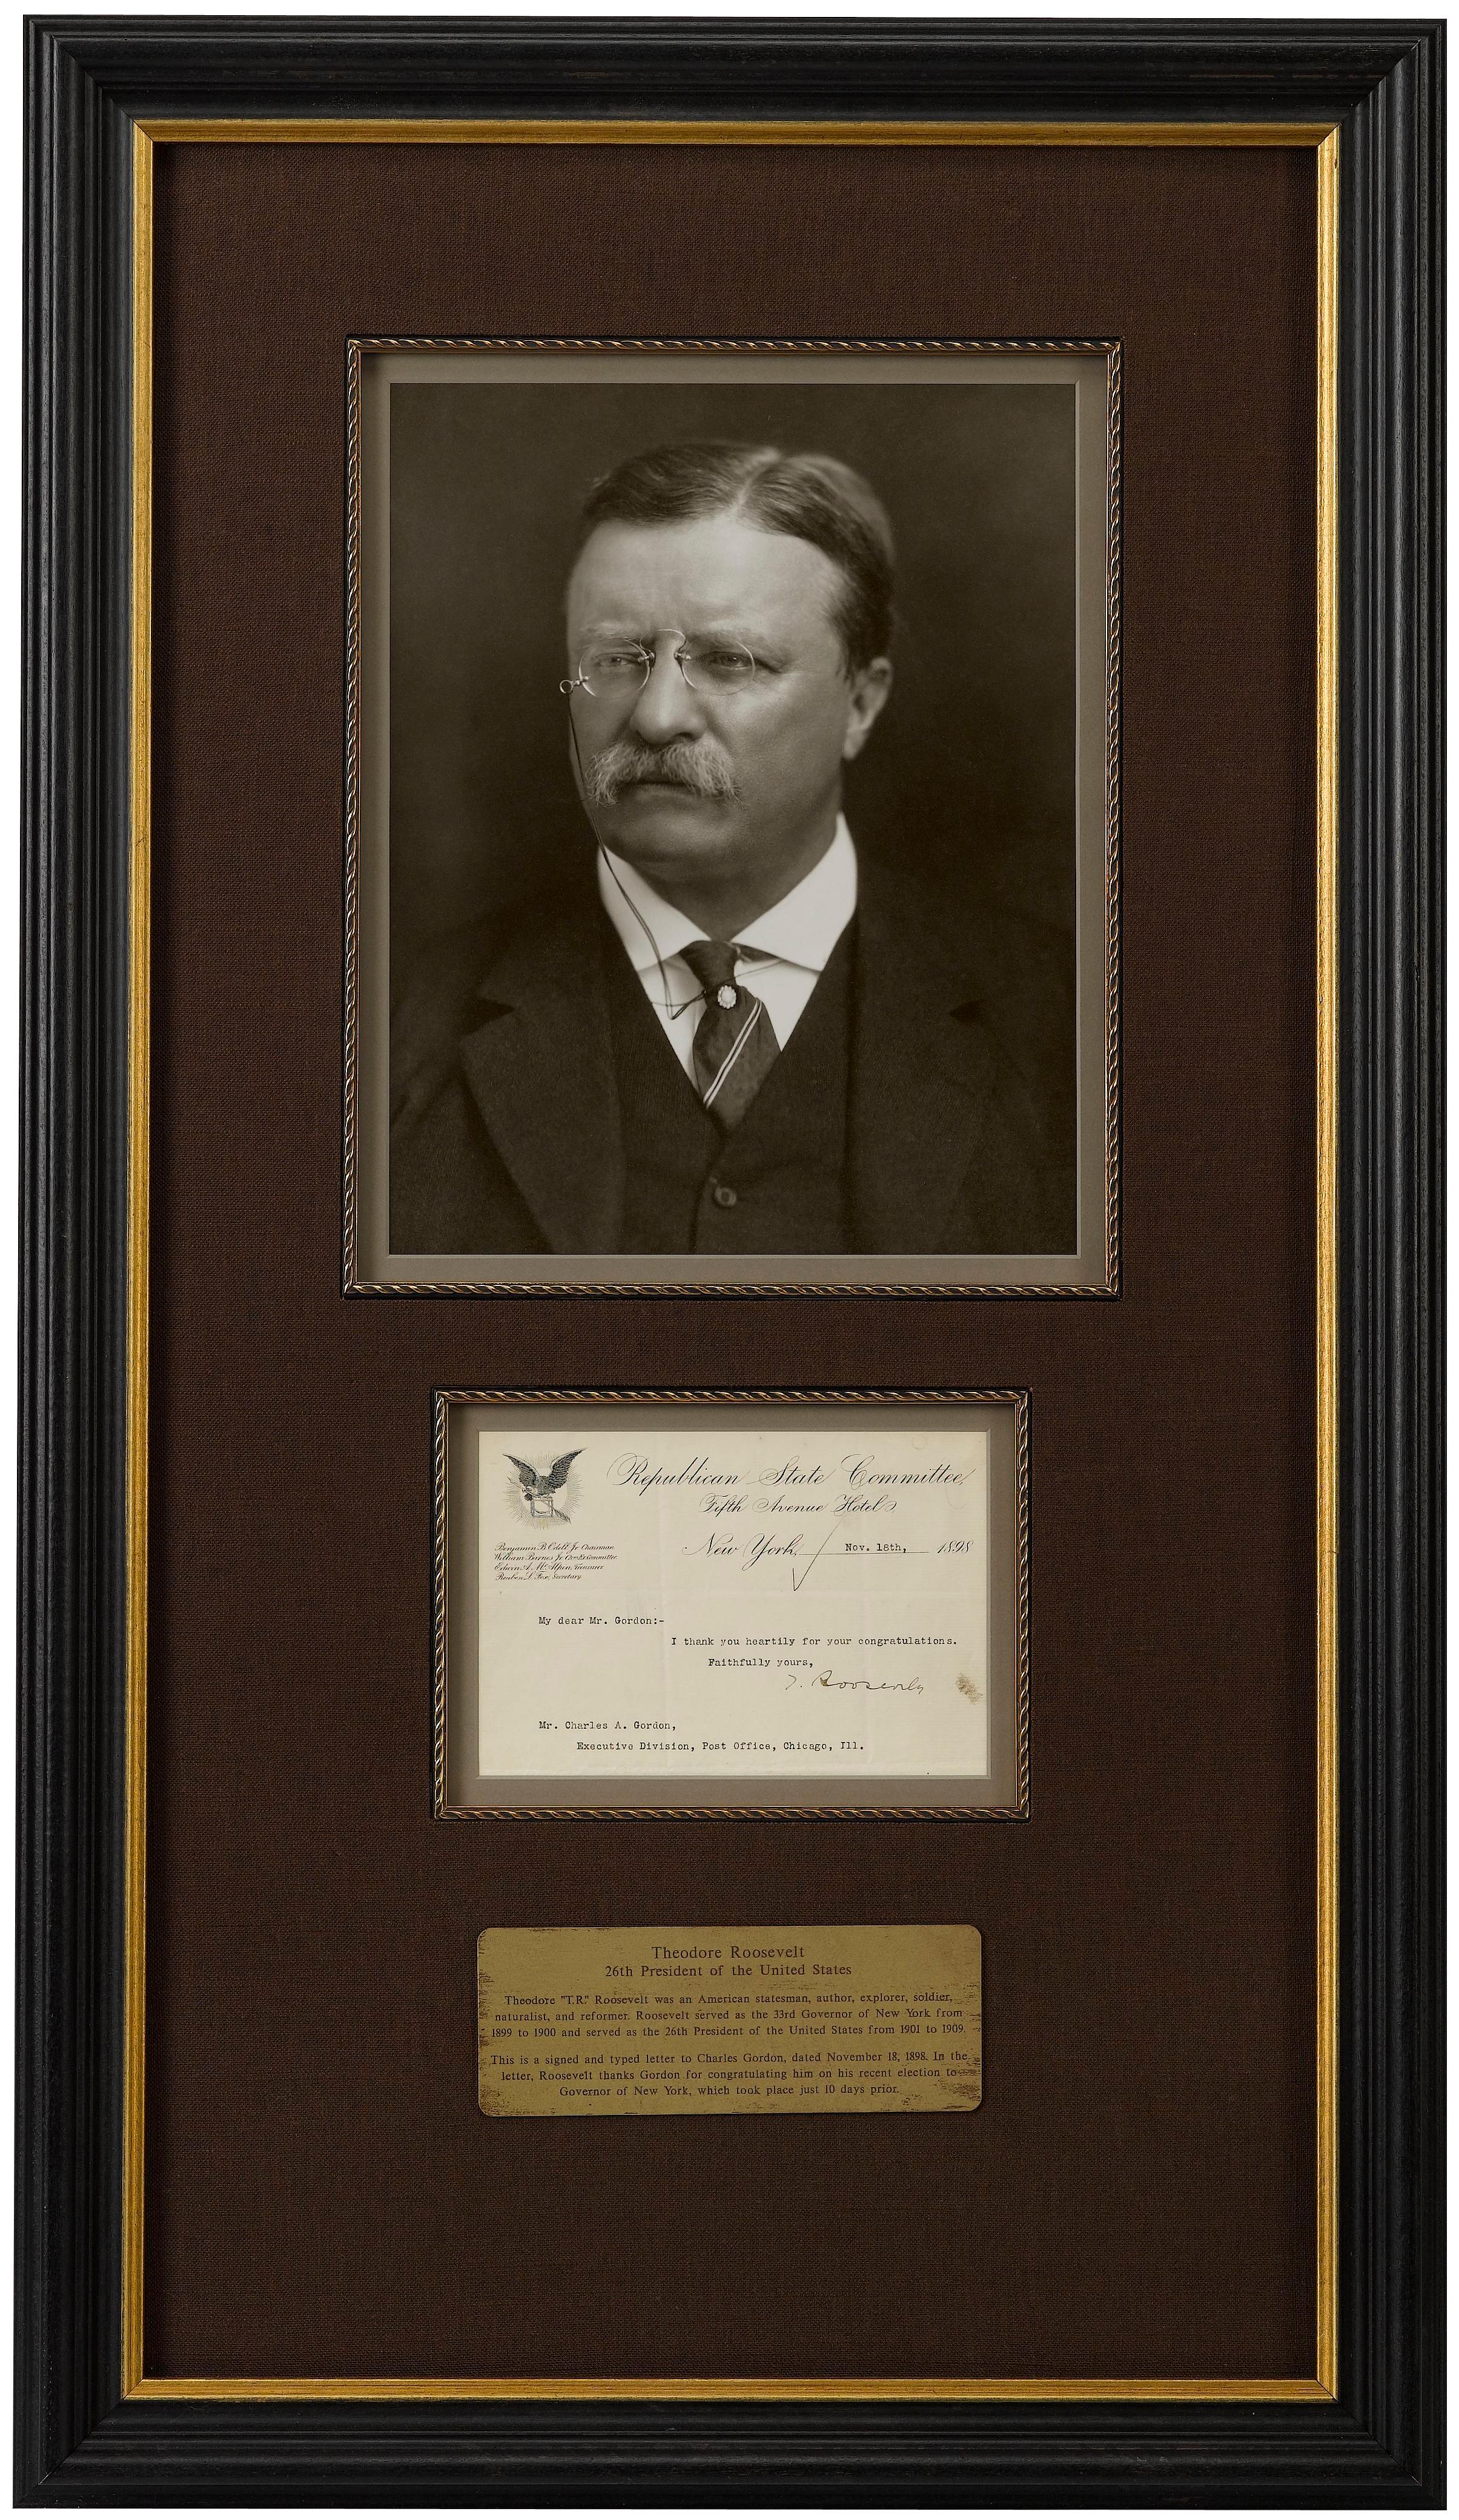 This autograph collage features an original typed and signed letter by Theodore Roosevelt. The letter was typed on Republican State Committee letterhead, and is dated November 18, 1898. Roosevelt wrote the letter to Charles Gordon to thank him